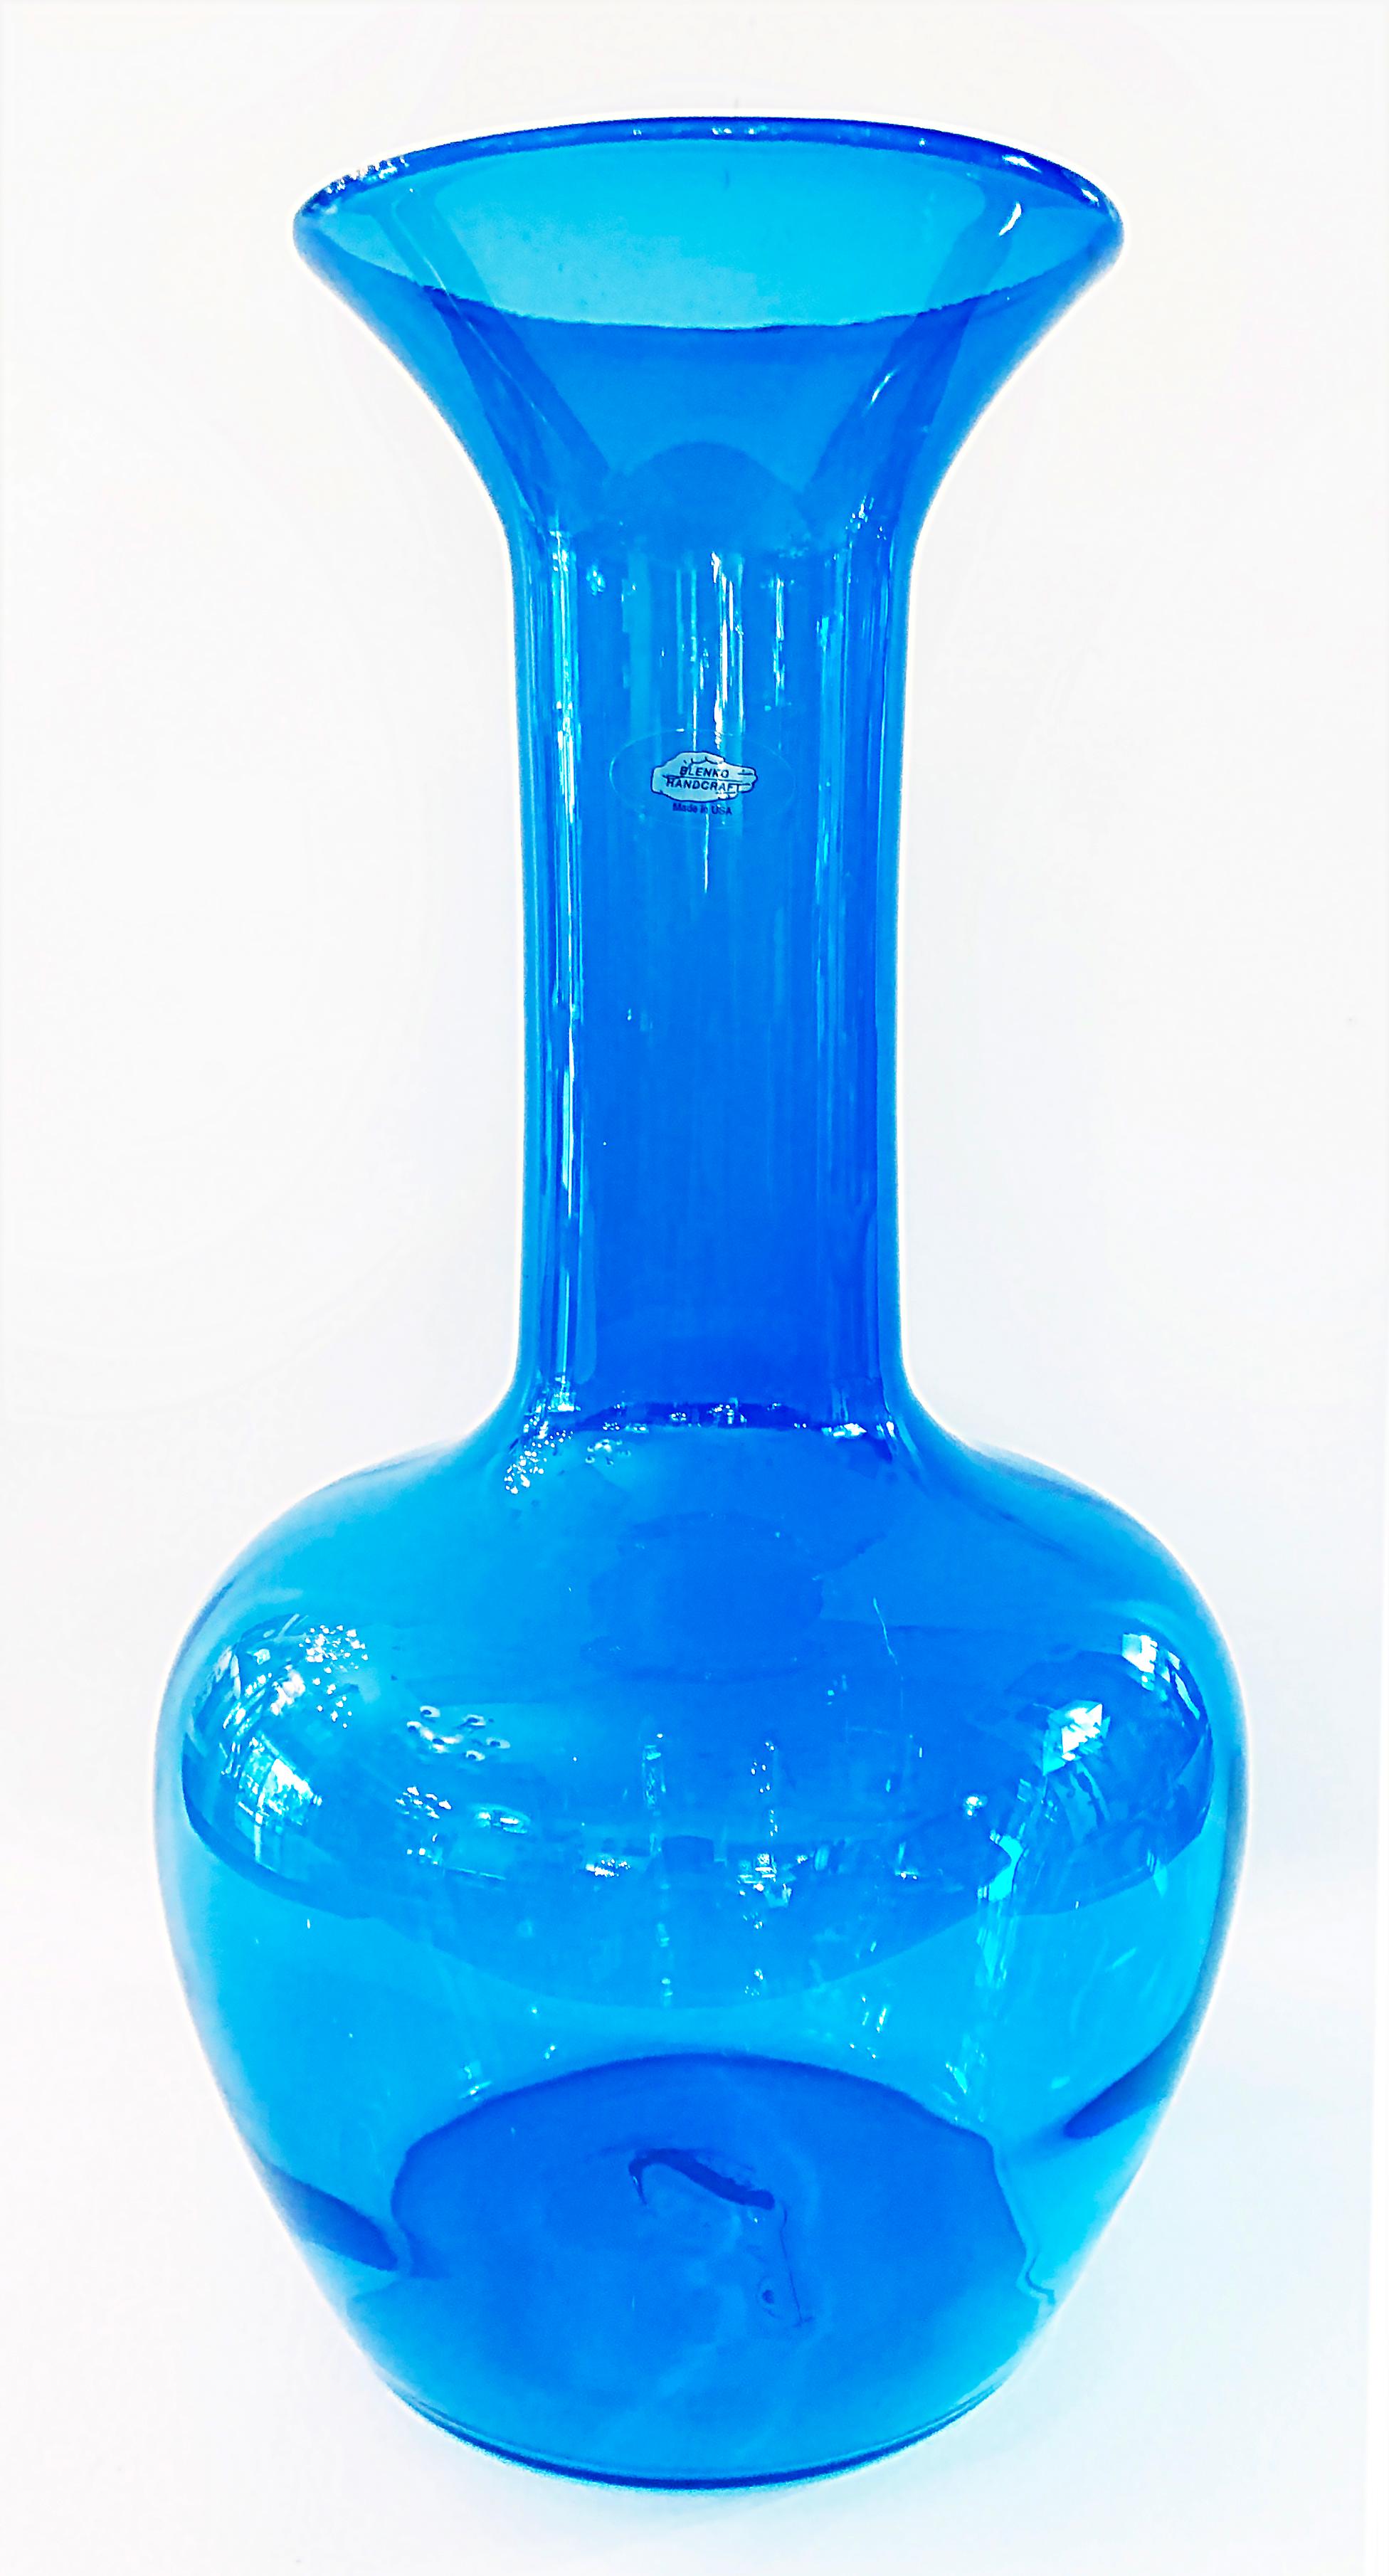 Vintage blue Bulbous Blenko blown glass vase with sticker

Offered for sale is a blue bulbous Blenko glass vase with a long neck and a flared lip. The glass vase retains the original Blenko sticker on the side of the neck which reads: 